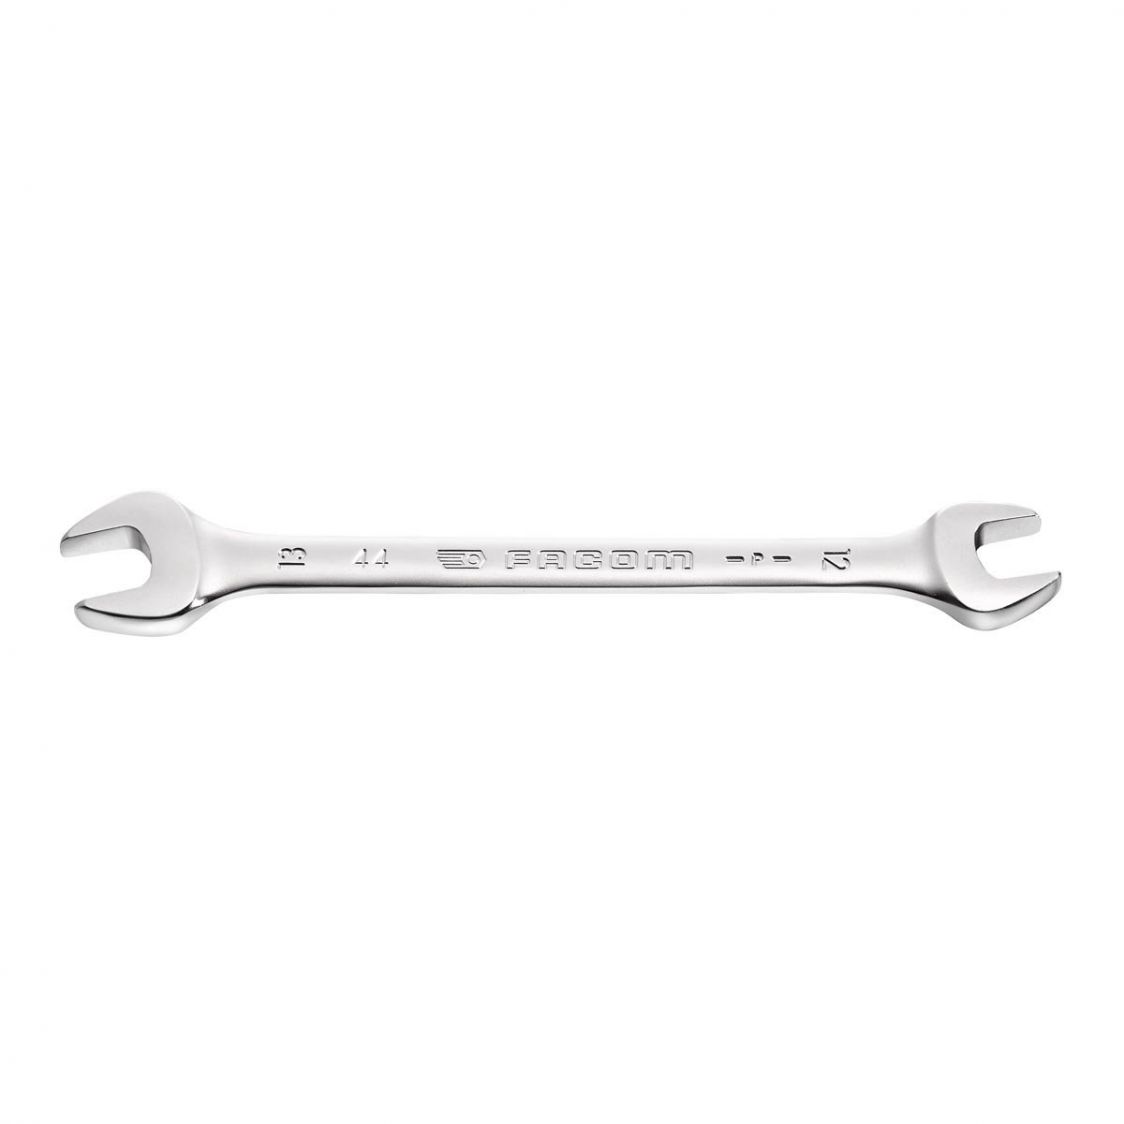 FACOM 44.18X19 - 18x19mm Metric Open Jaw Spanner